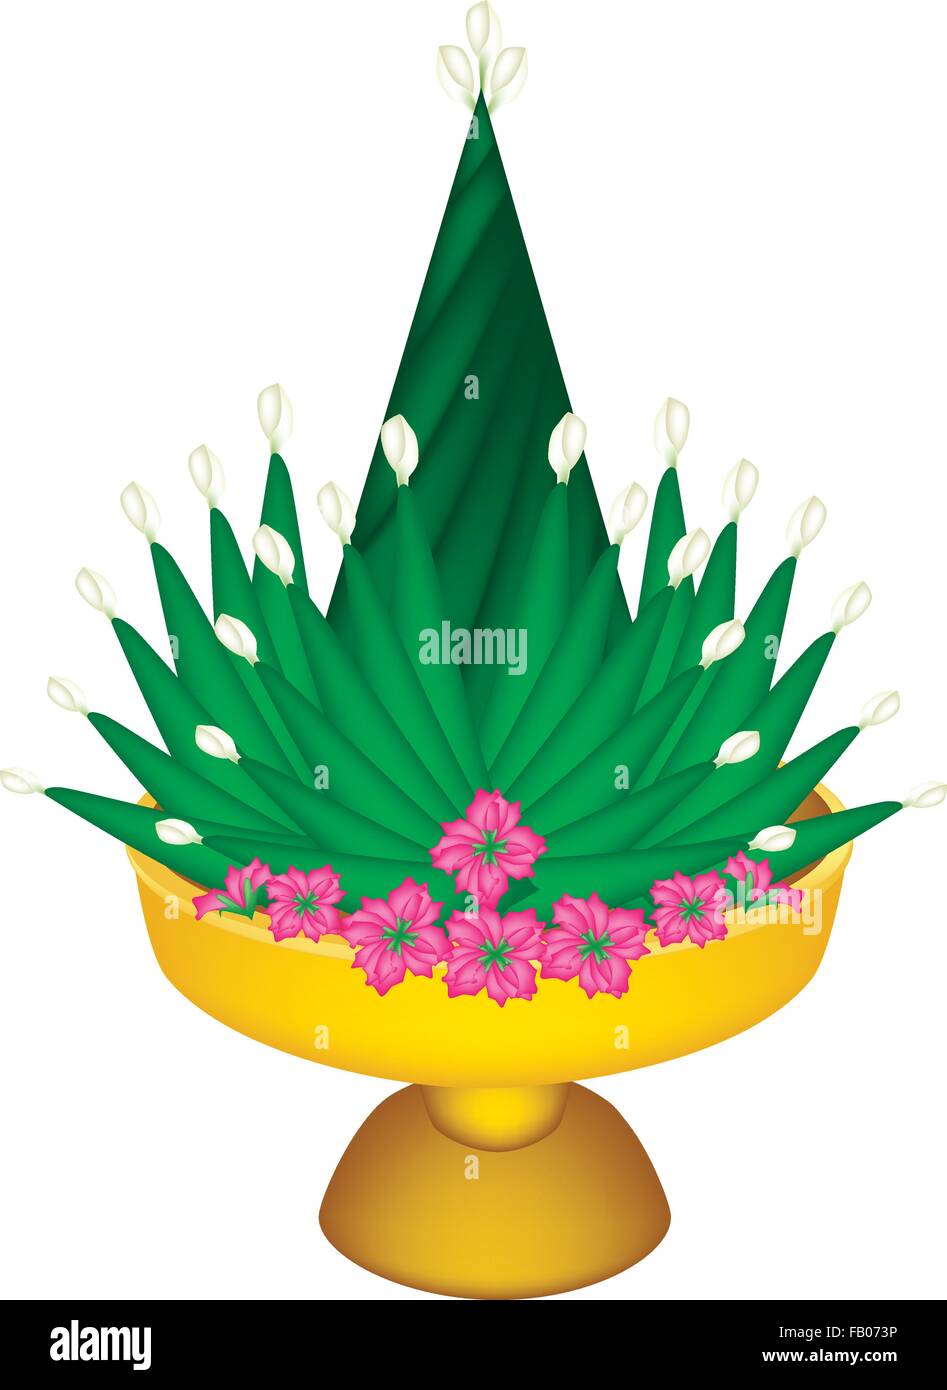 An Illustration of Rituals Cone from Banana Leaf and Jasmine Decorated on Tray with Pedestal for Paying Respect to Teachers or E Stock Vector